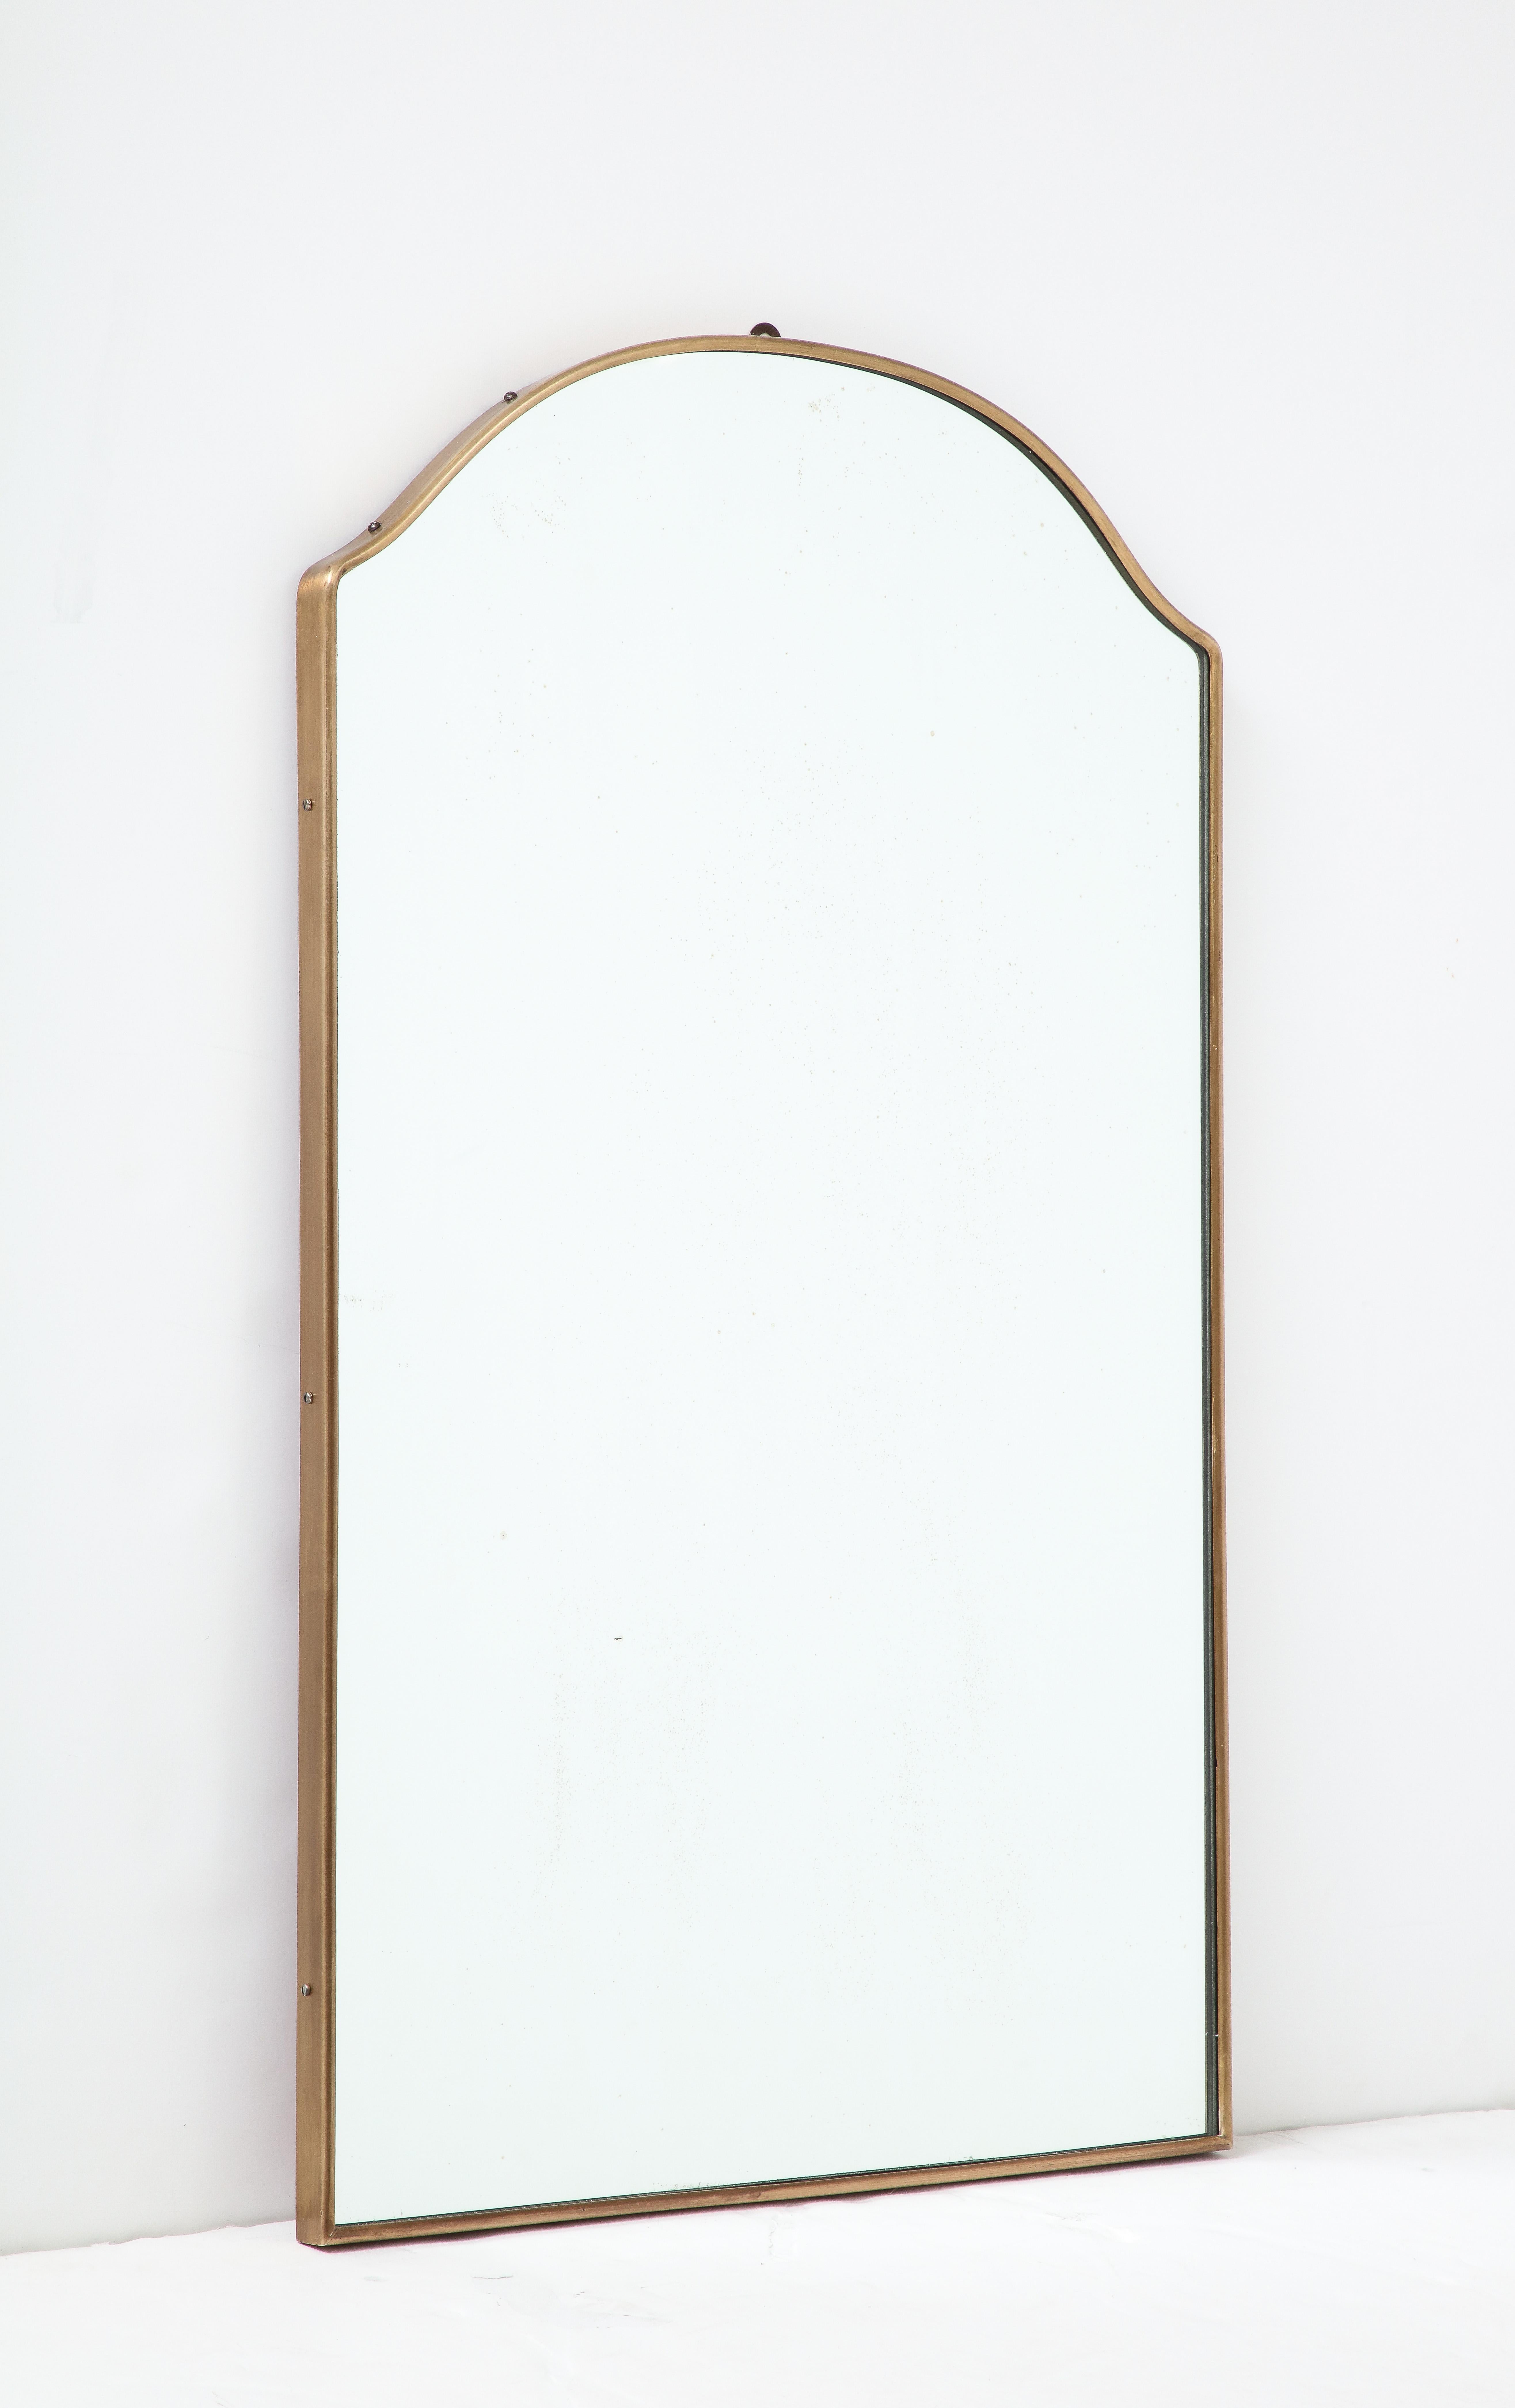 1950s Italian elegantly shaped brass wall mirror with a beautifully arched top. The mirror has a nice brass patina and is finely constructed with a wood backing.